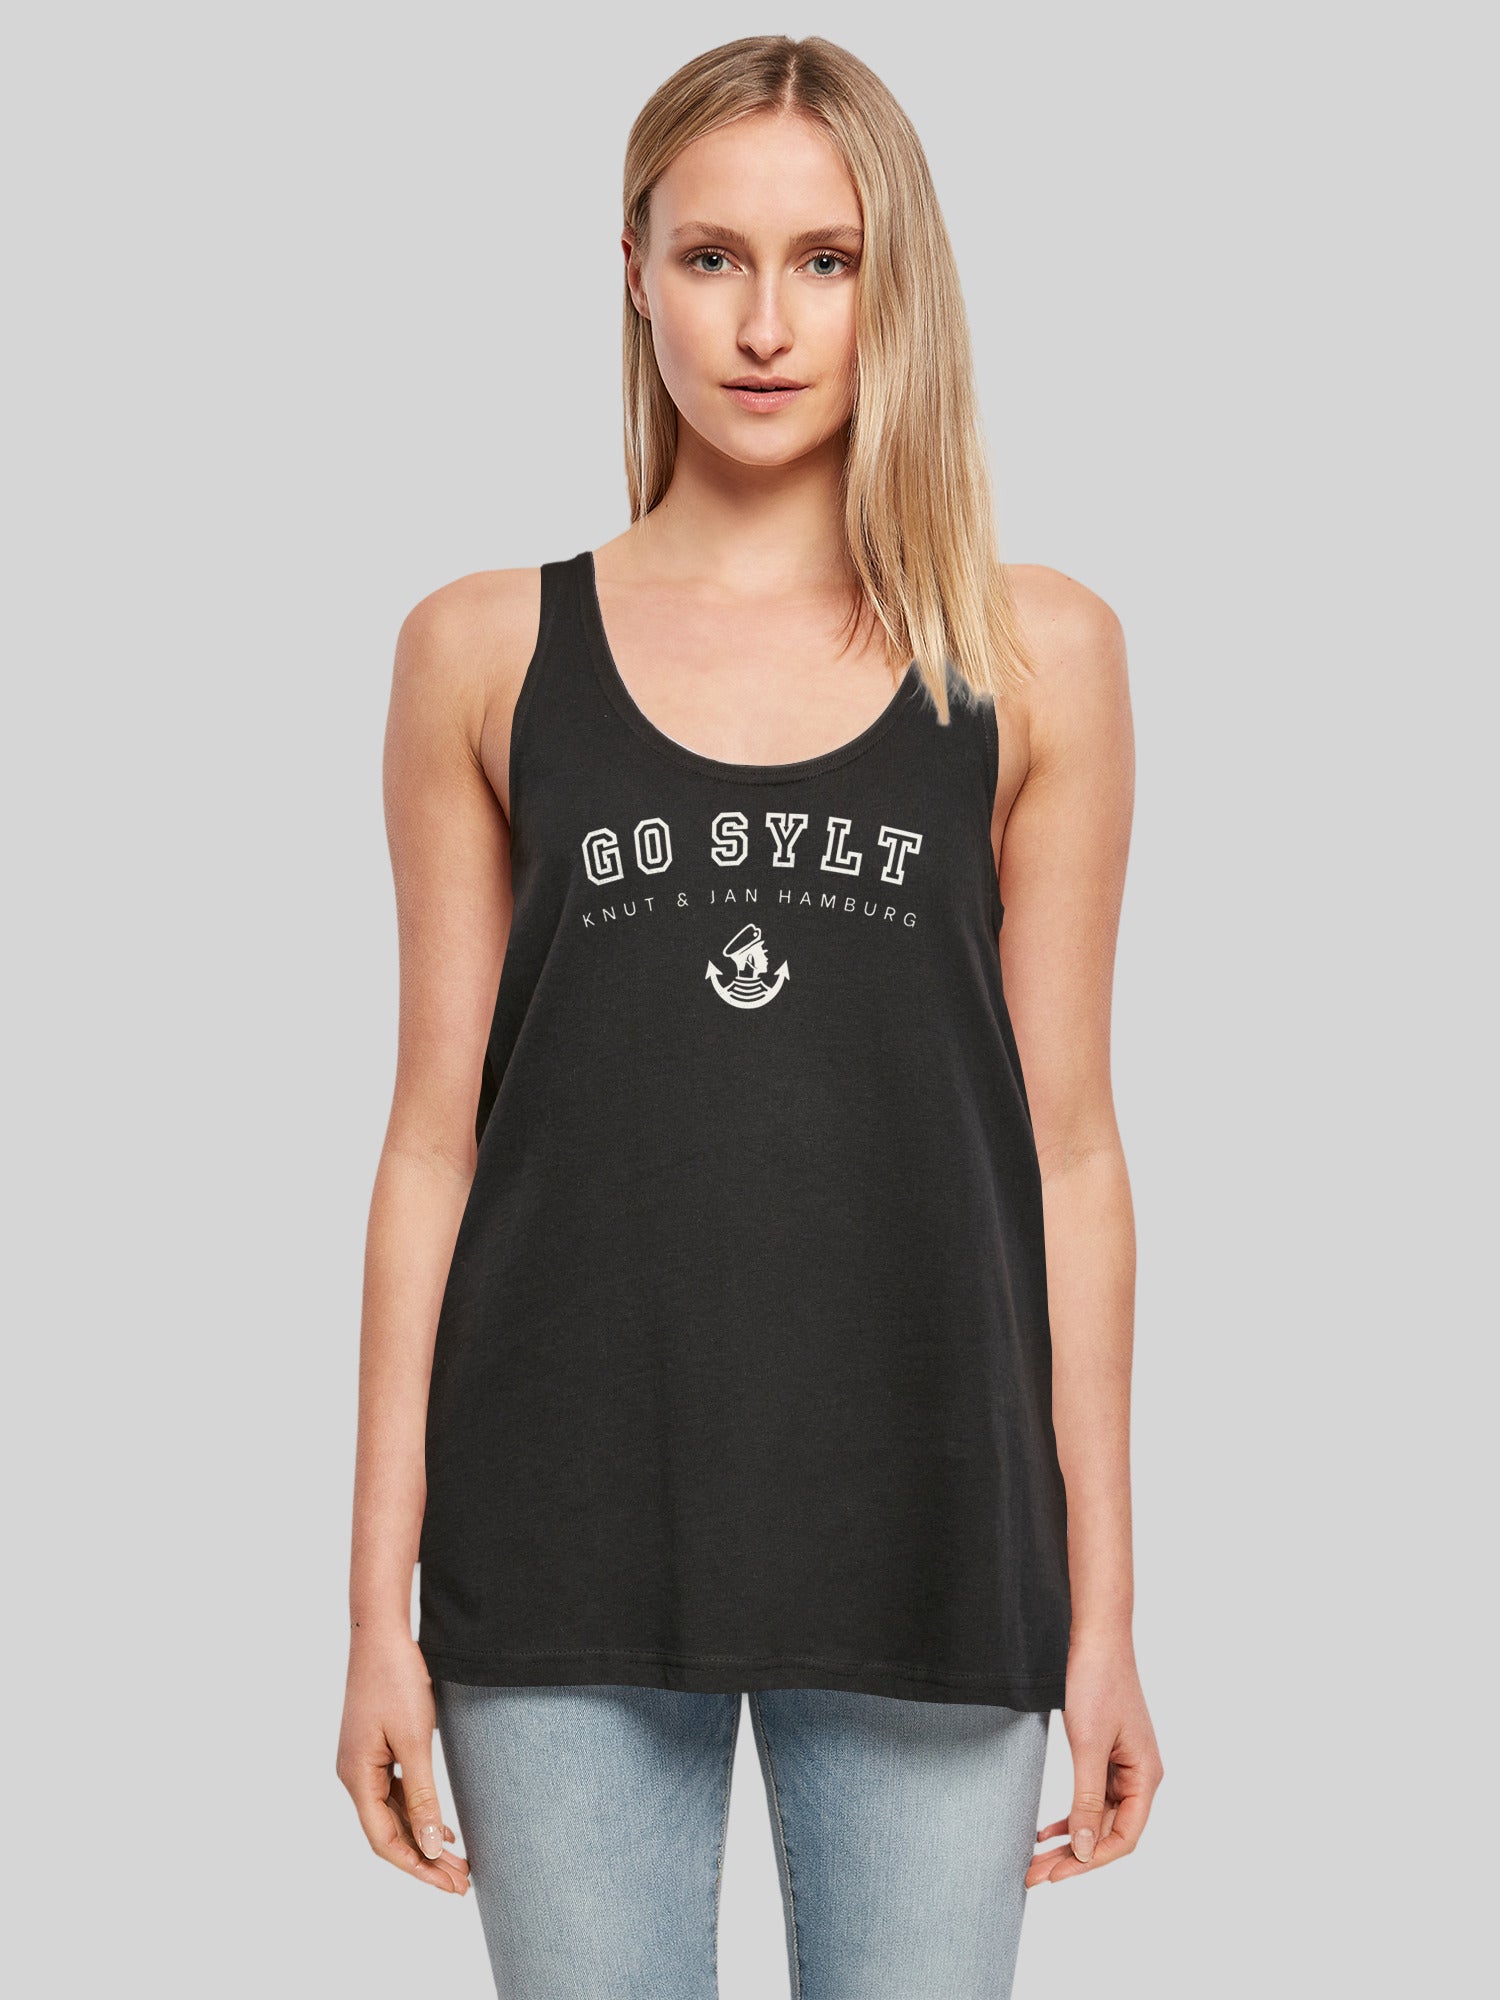 Blk Ladies Crest Tanktop F4NT4STIC – Queen Classic with